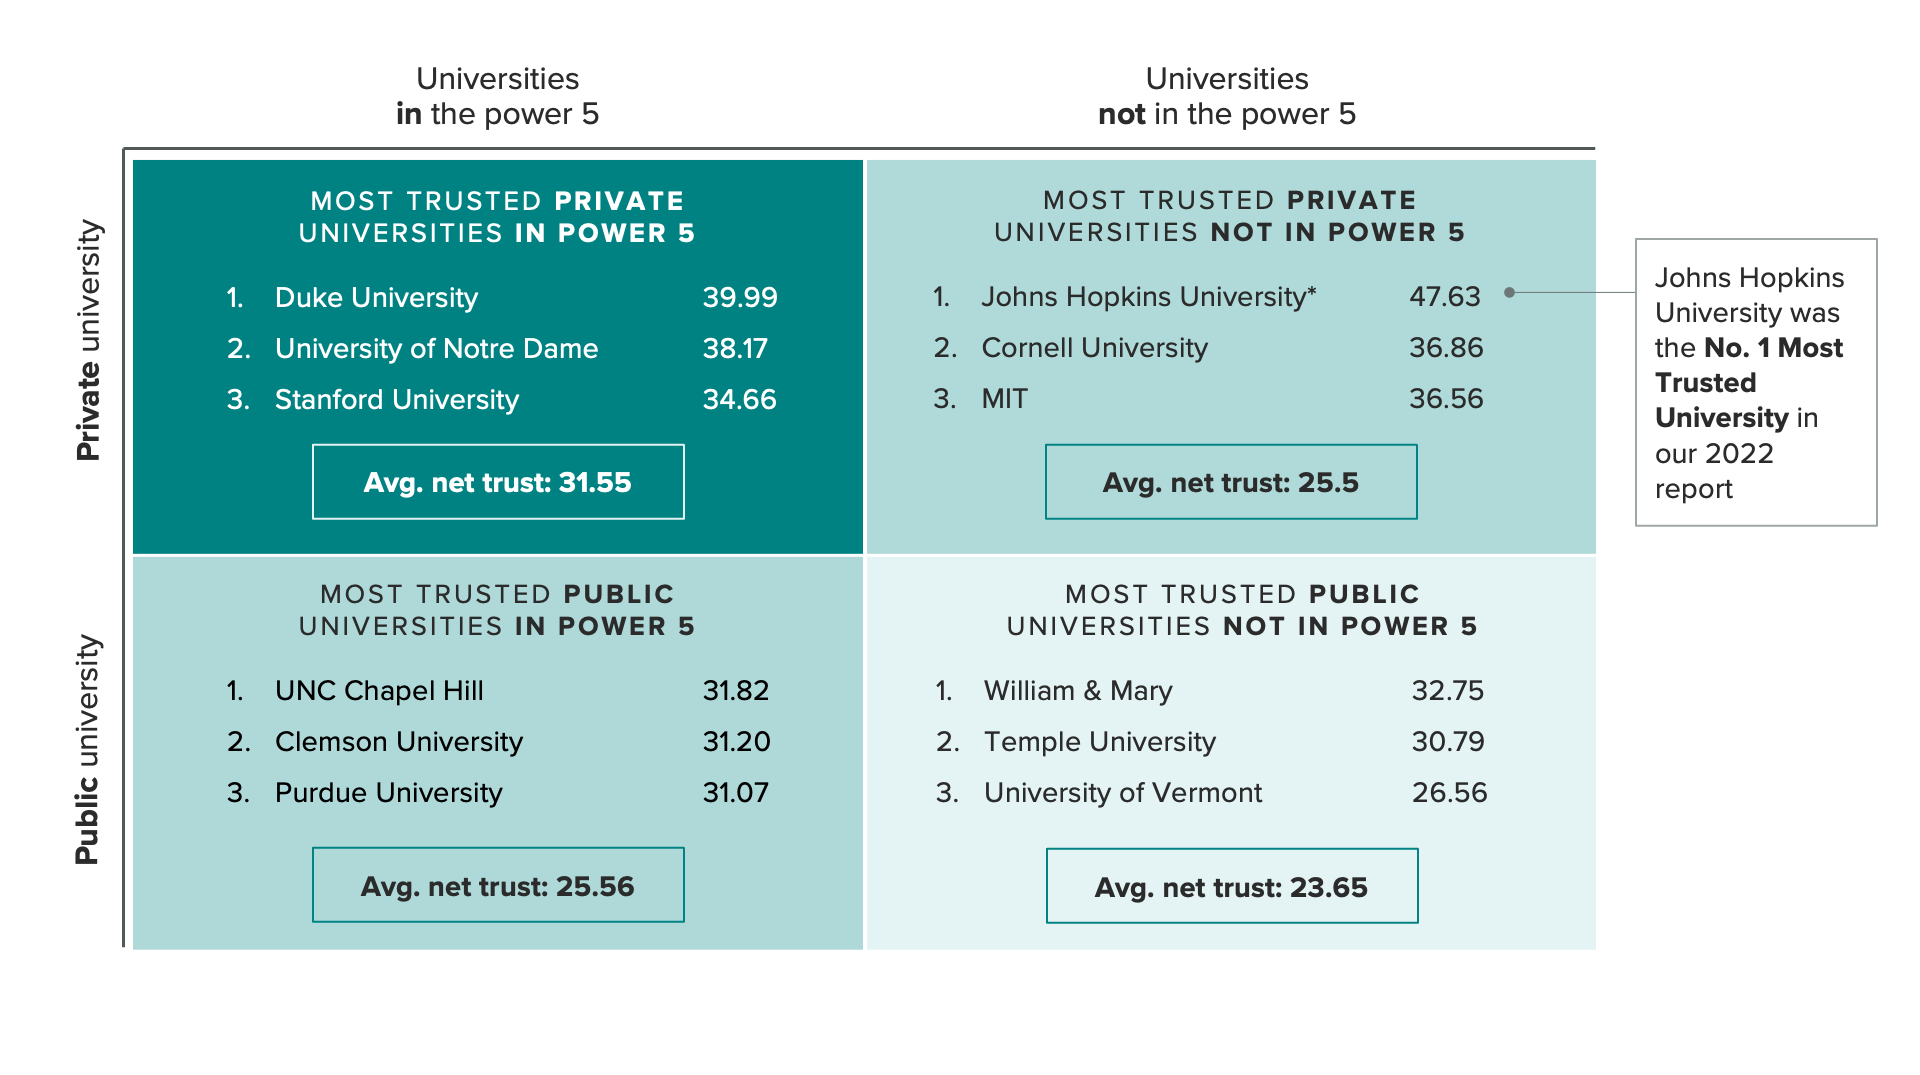 Table of the most trusted public and private universities within and not within the Power Five conferences, showing many of the Most Trusted Universities are buoyed by their affiliation with Power Five conferences.